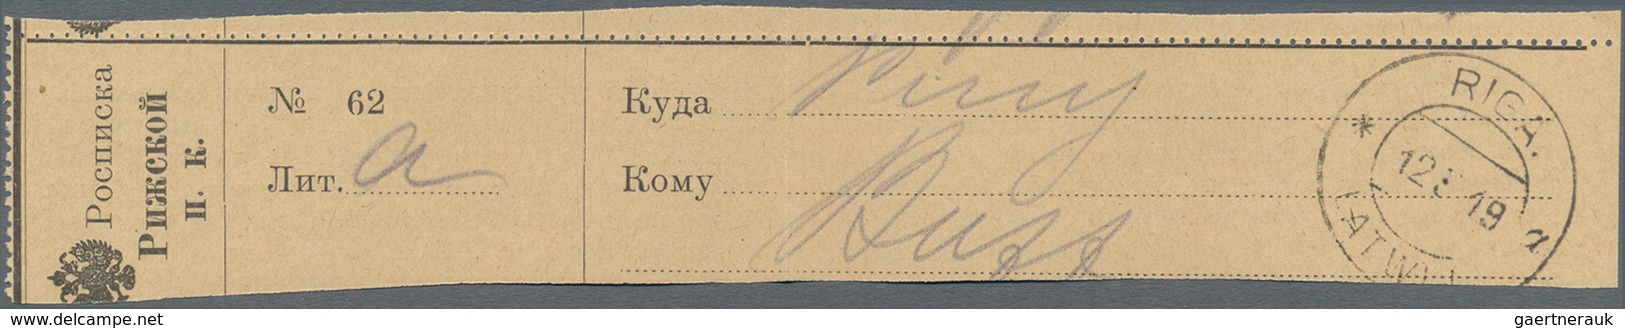 Lettland: 1919, Registered Card Letter Within " RIGA LATWIJA 12 5 19" With Delivery Receipt. - Letonia